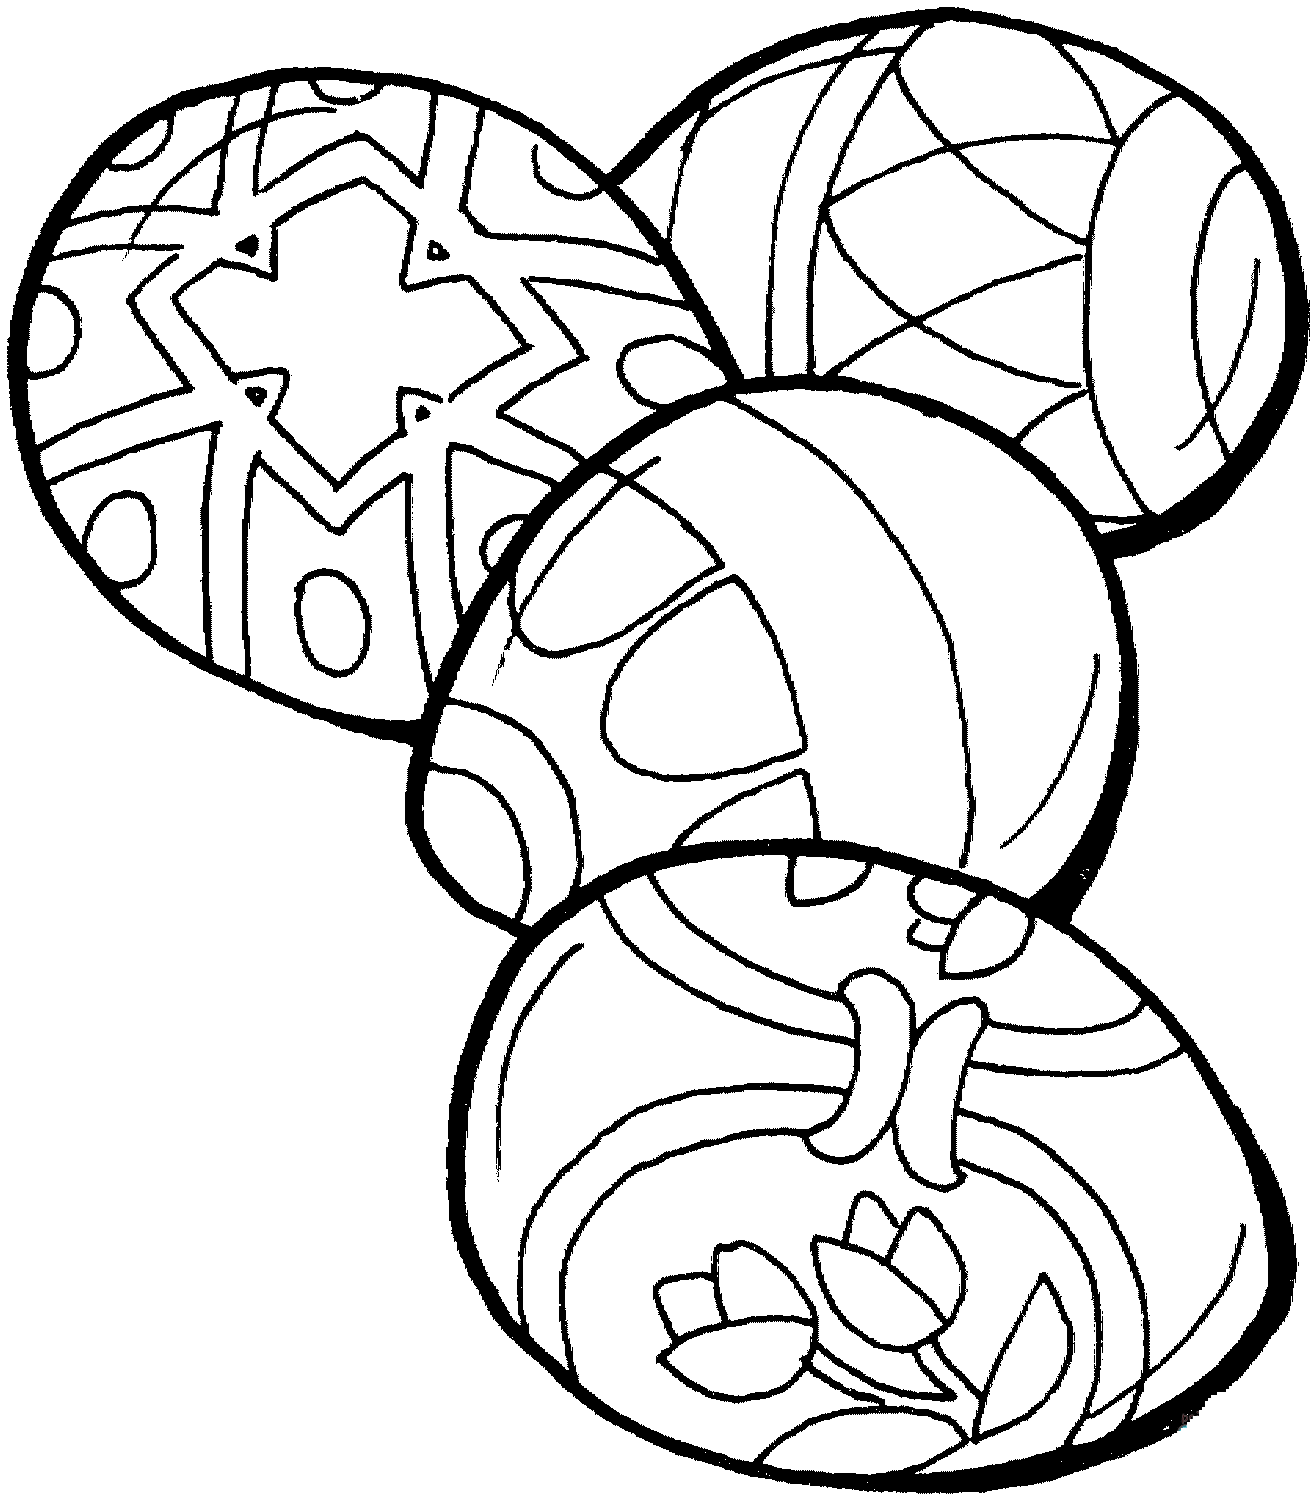 Four Easter Eggs Coloring Page